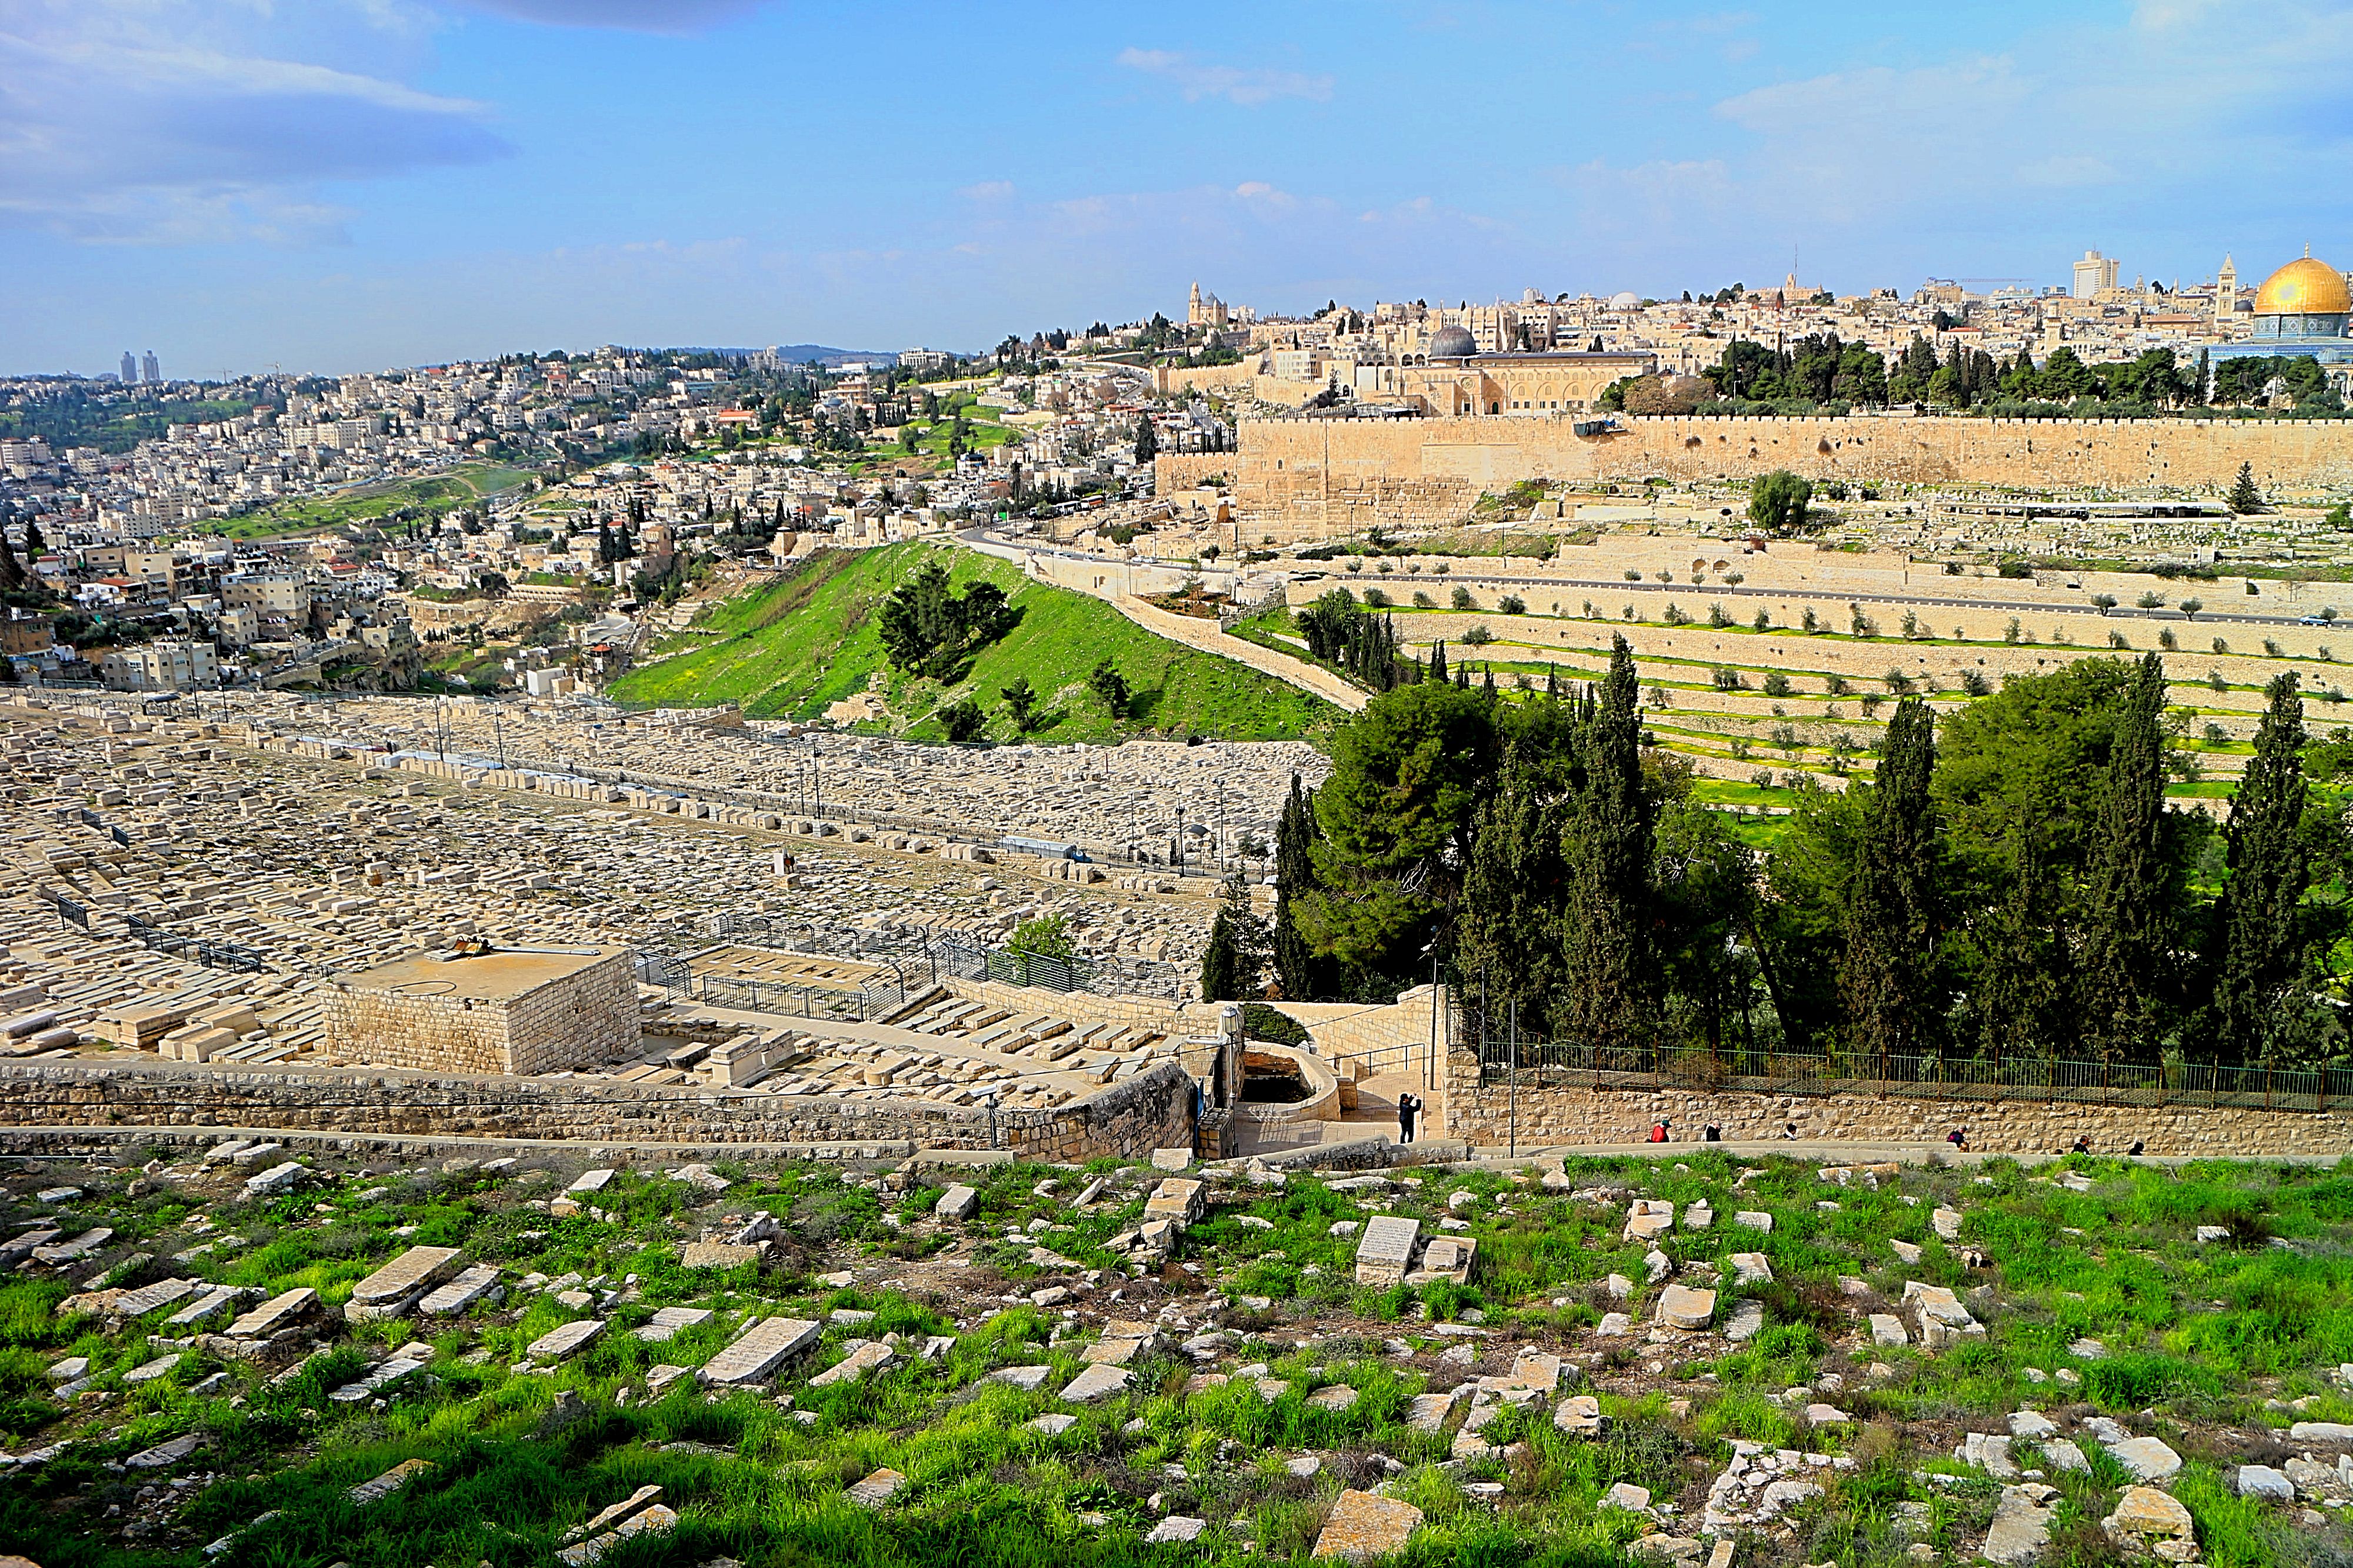 View of the Jewish Cemetery on the Mount of Olives